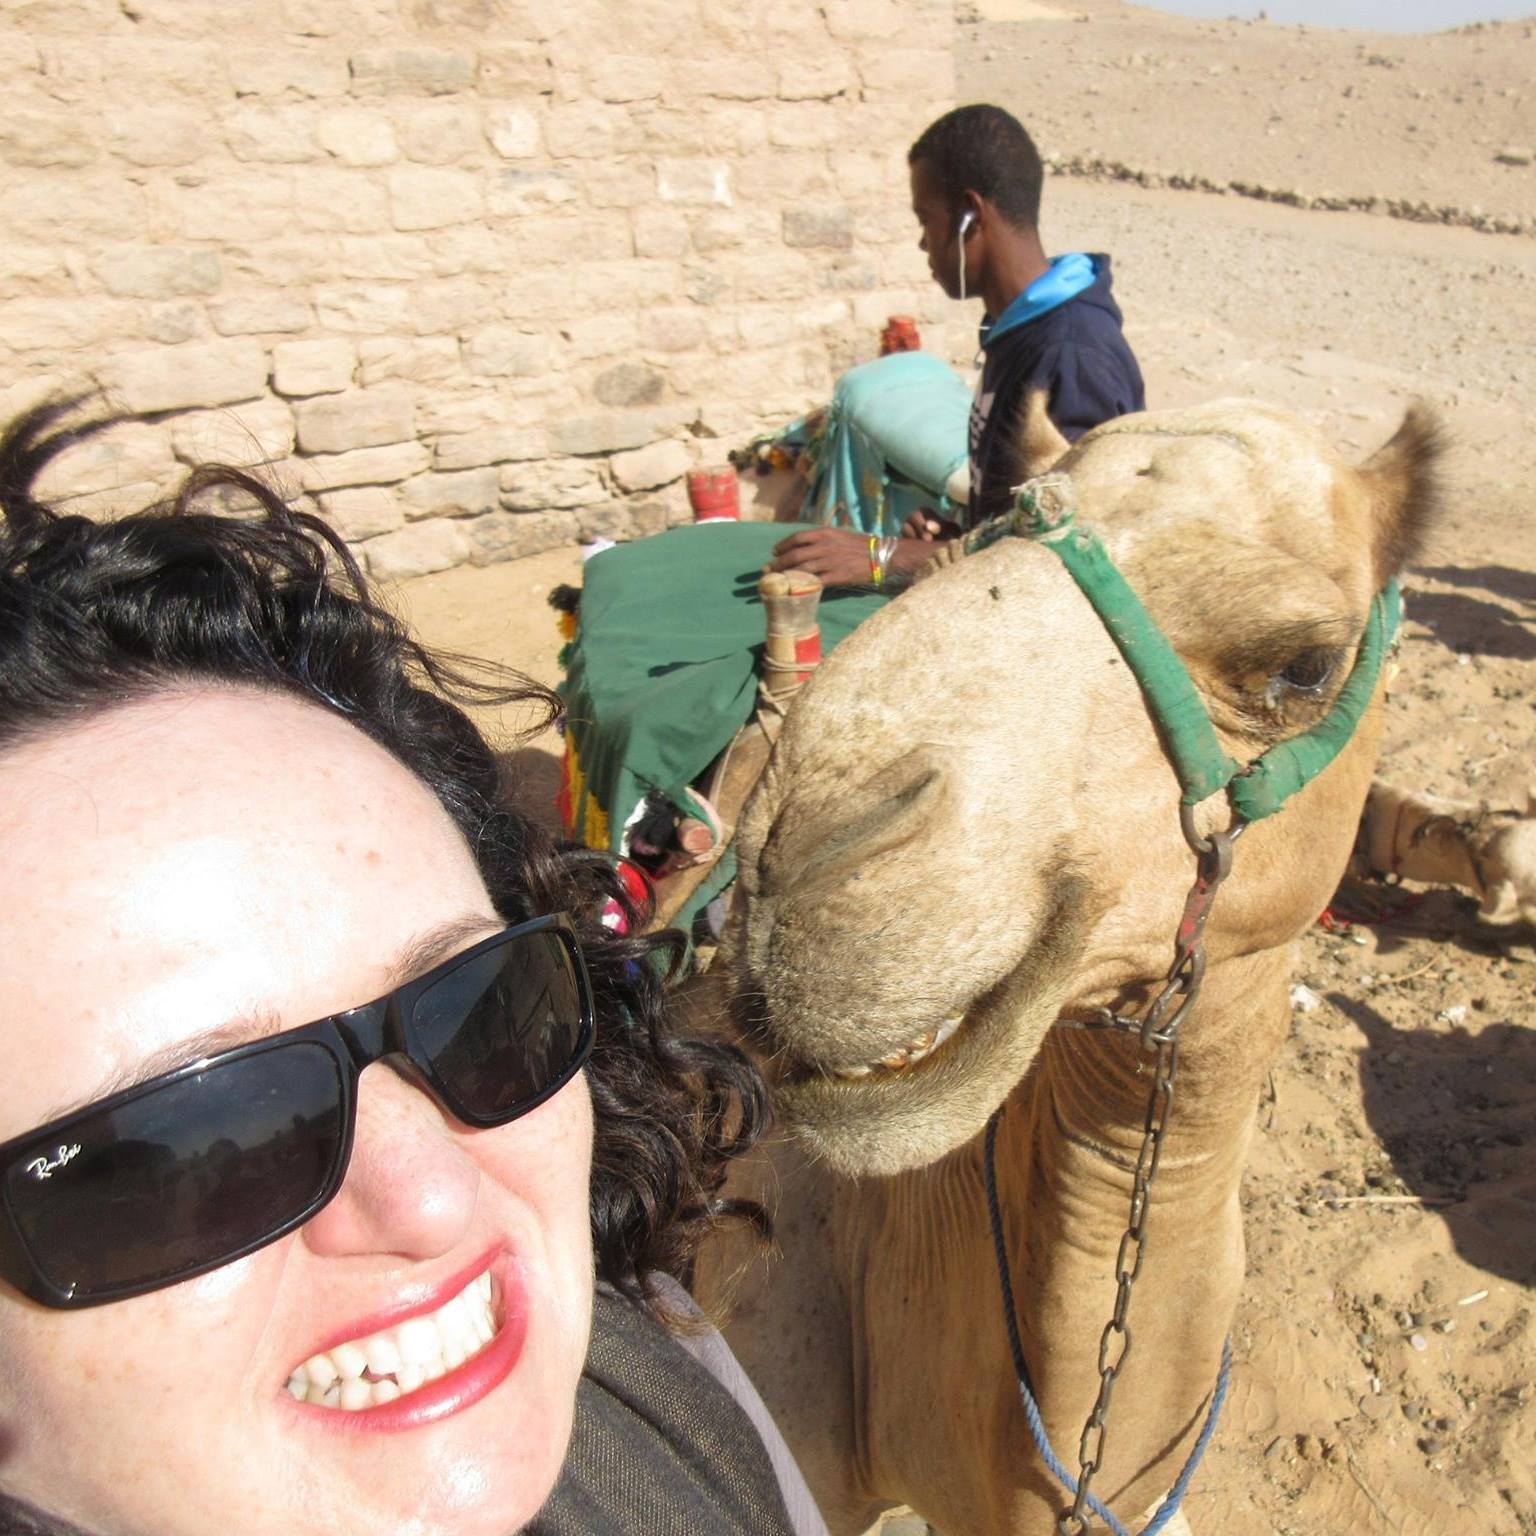 Laura in Egypt with a Camel and locals